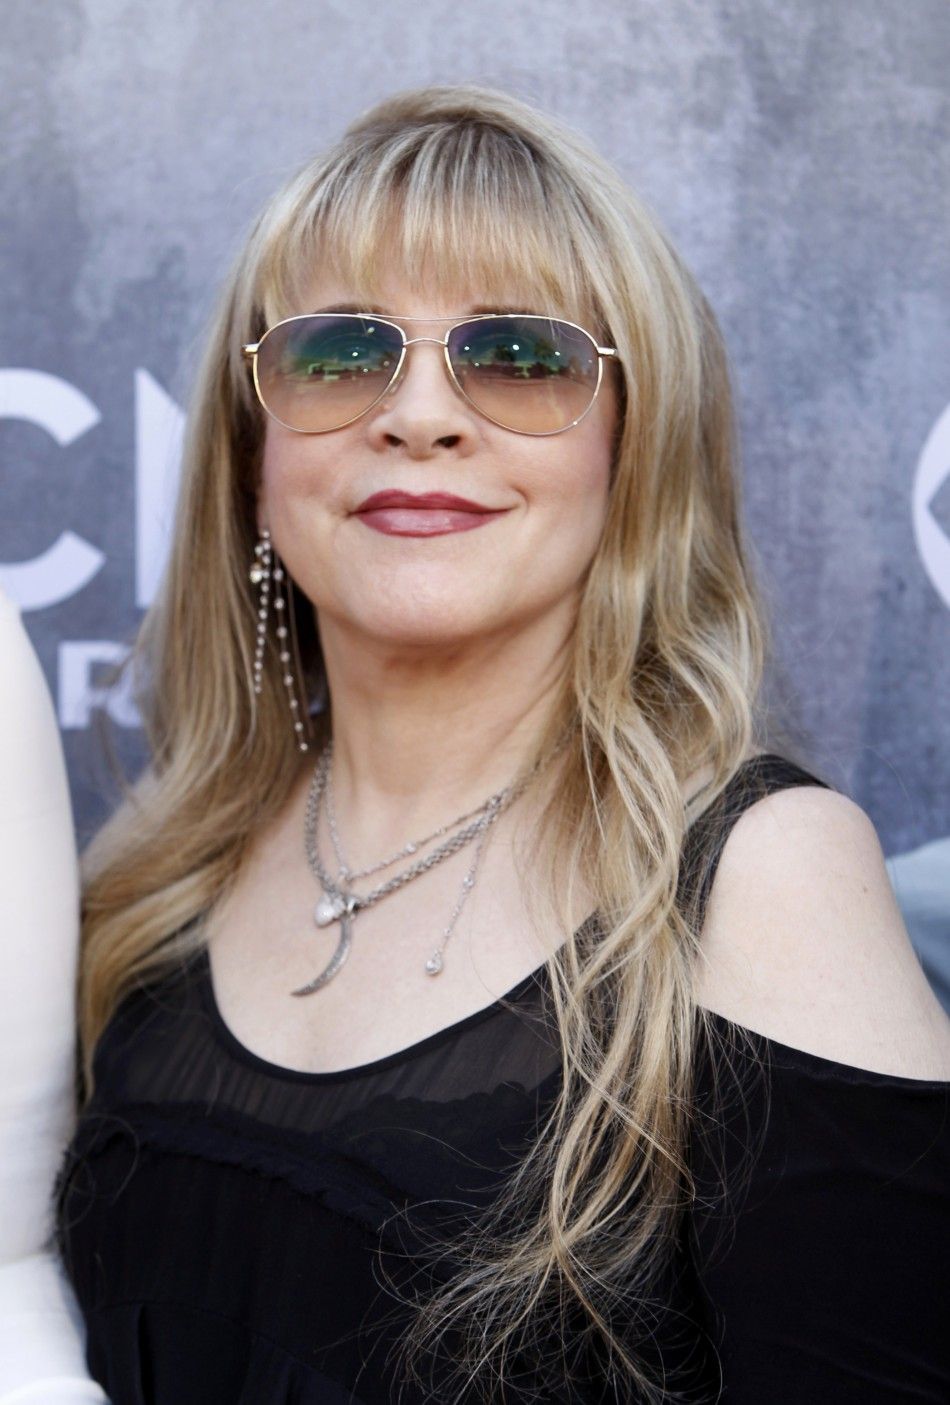 Singer Stevie Nicks arrives at the 49th Annual Academy of Country Music Awards in Las Vegas